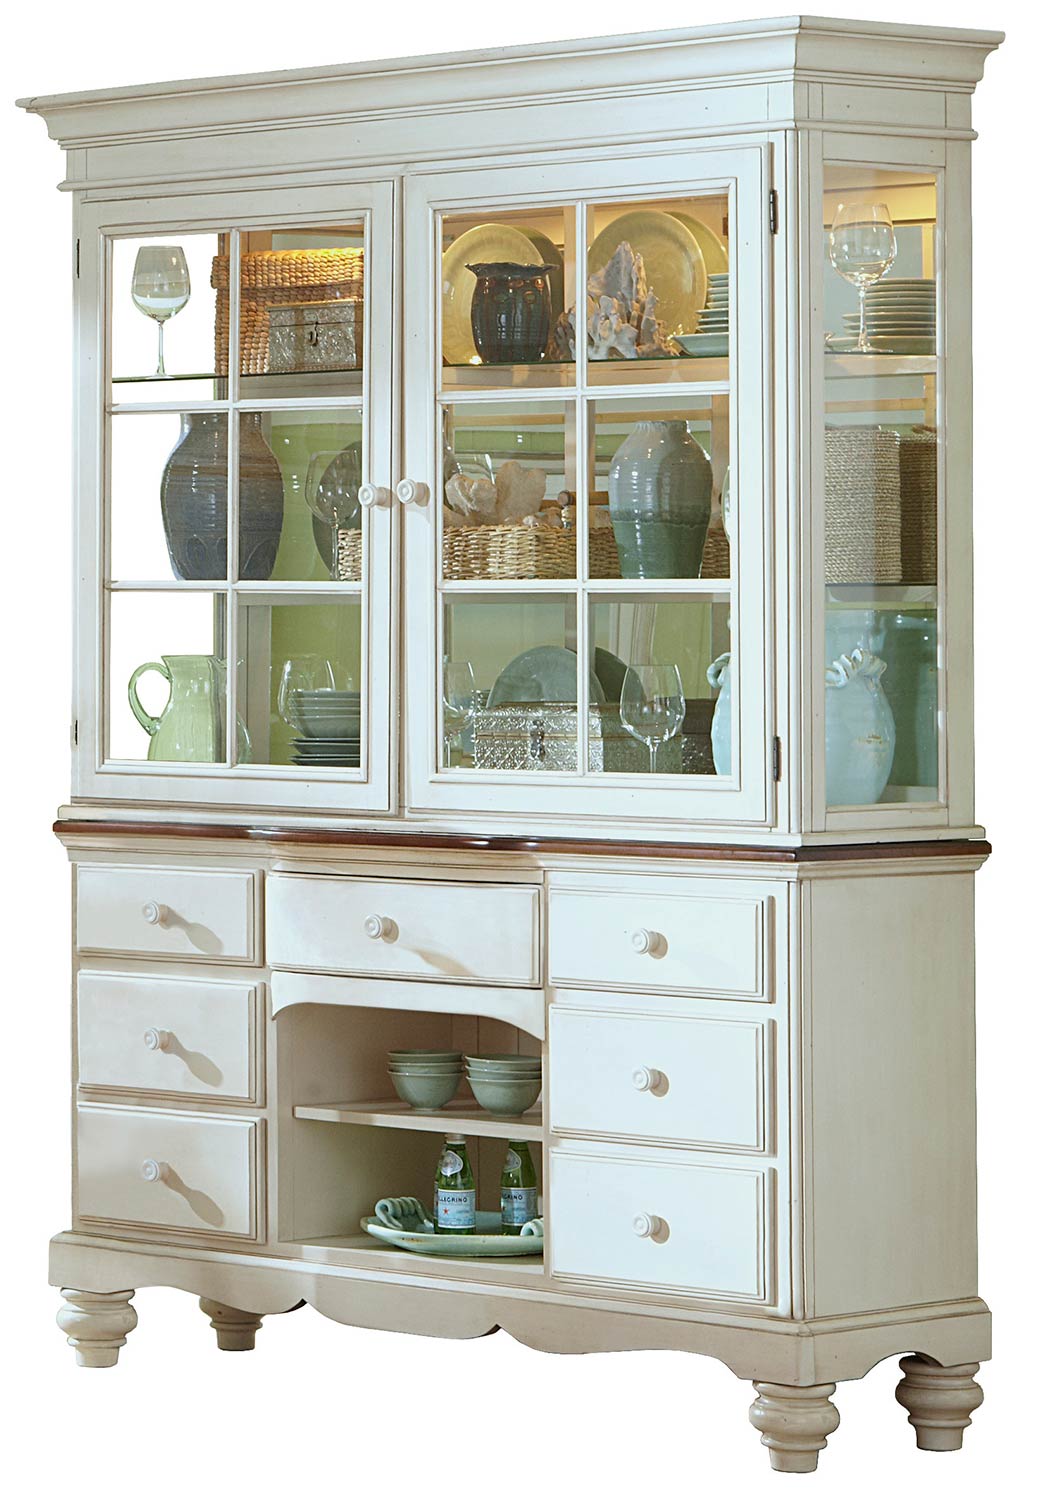 Hillsdale Pine Island Buffet and Hutch - Old White